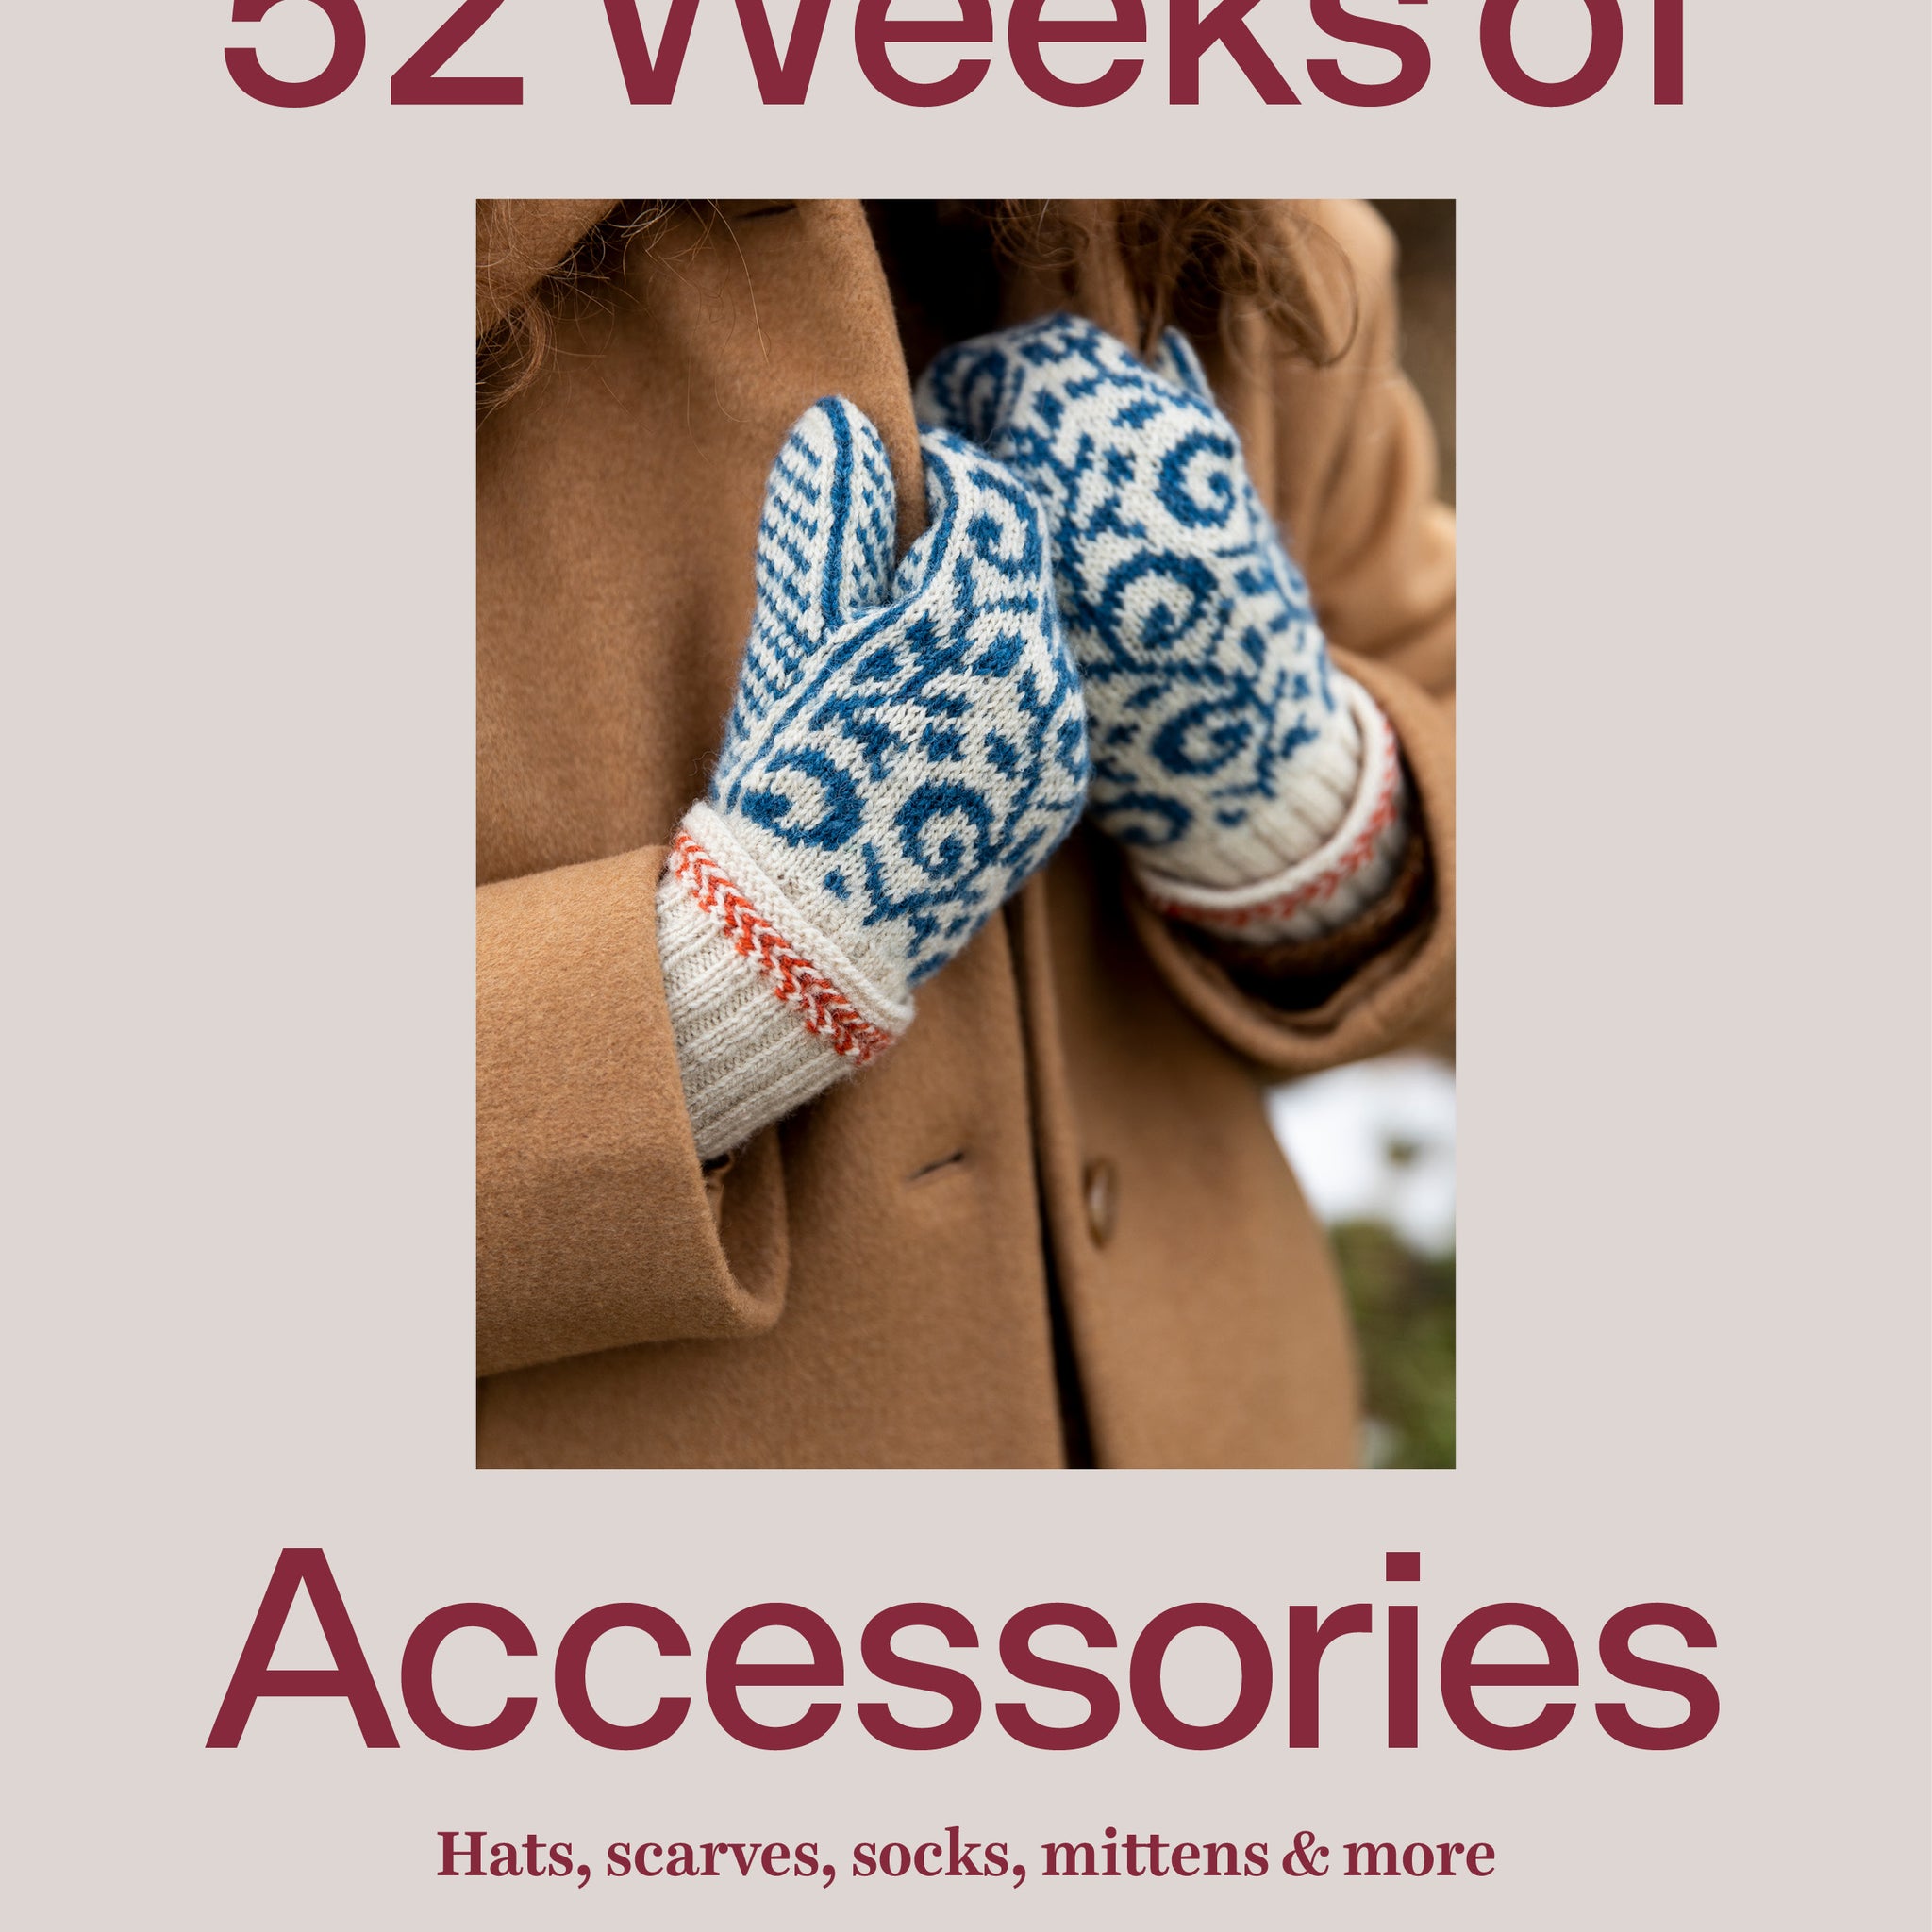 52 weeks of Accessoires